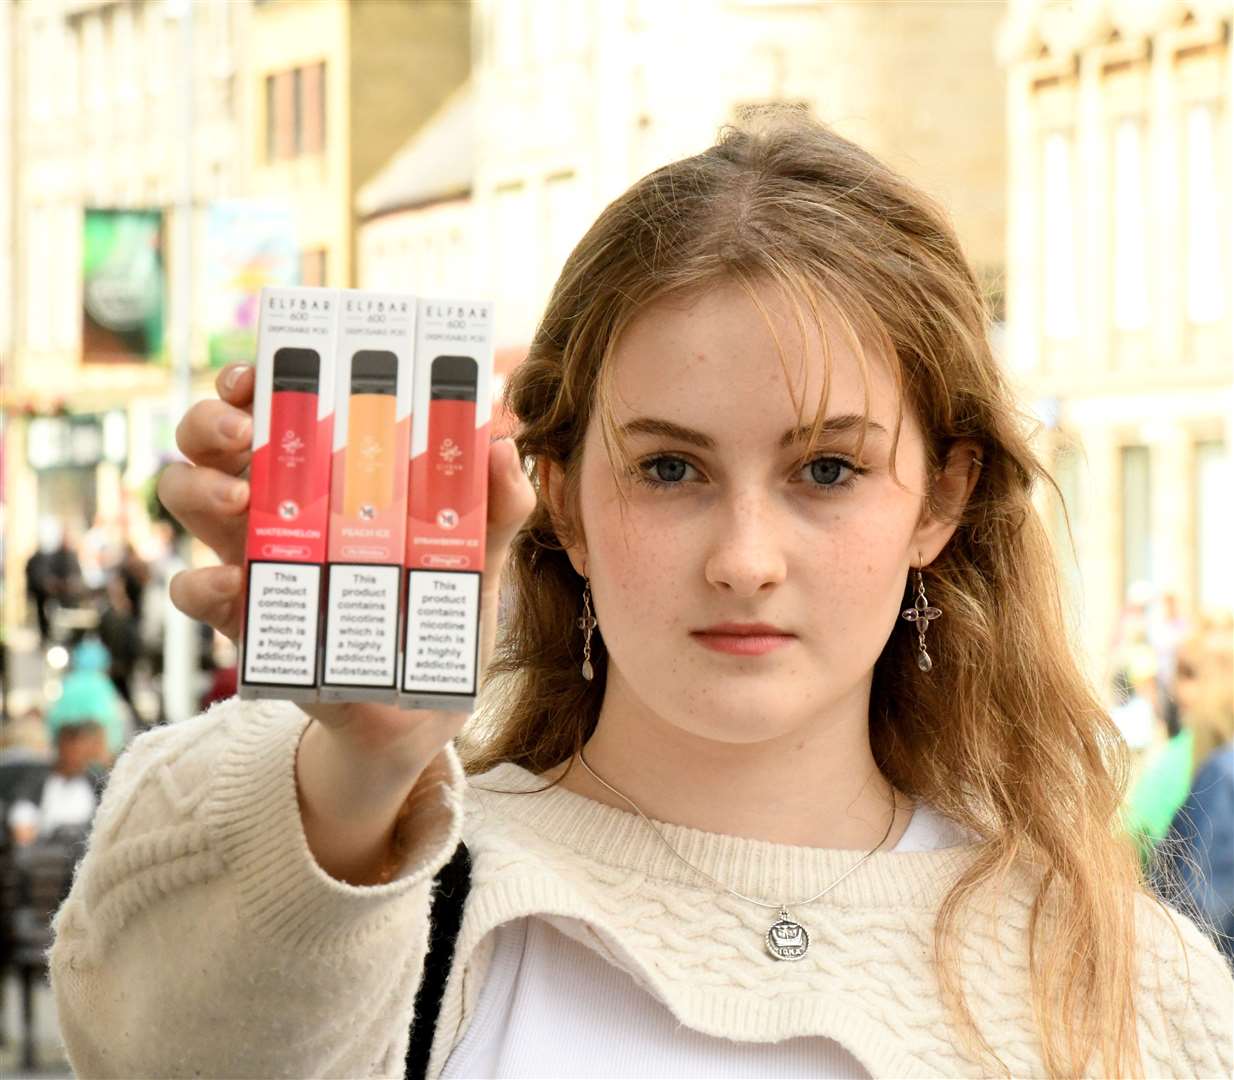 Iona MacDonald holding the e-cigarettes she was able to purchase. Picture: James Mackenzie.